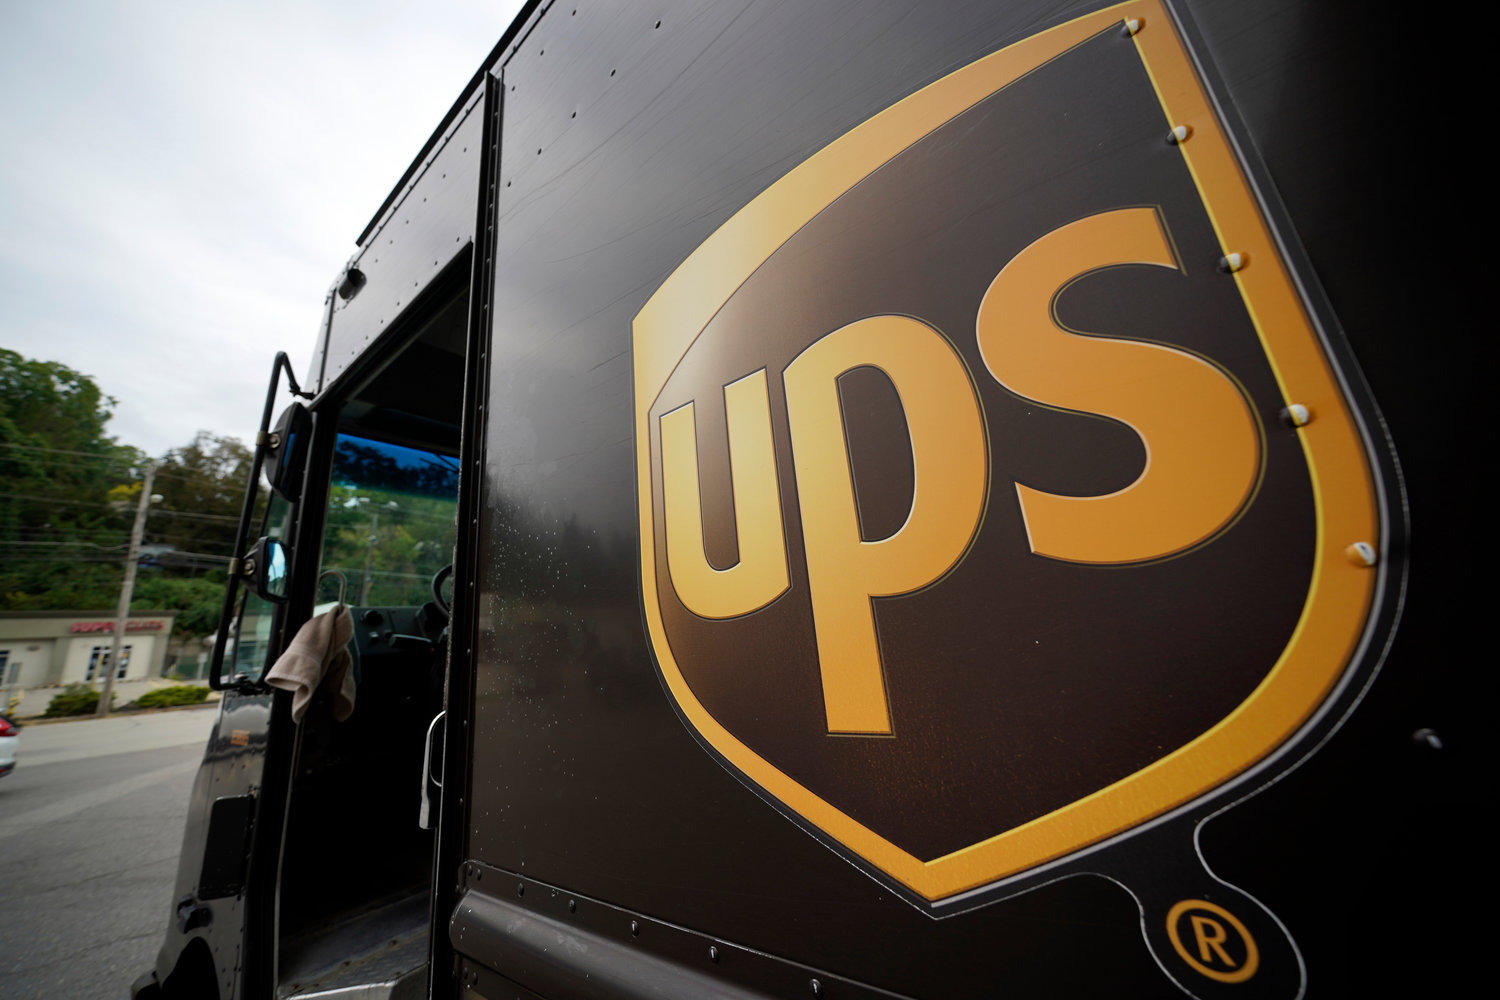 This is the UPS logo on the side of a delivery truck in Mount Lebanon, Pa., on Tuesday, Sept. 21, 2021. United Parcel Service said Wednesday, Sept 7, 2022, it plans to hire more than 100,000 extra workers to help handle an increase in packages during the critical holiday season. That‚Äôs similar to the holiday seasons of 2021 and 2020. (AP Photo/Gene J. Puskar)